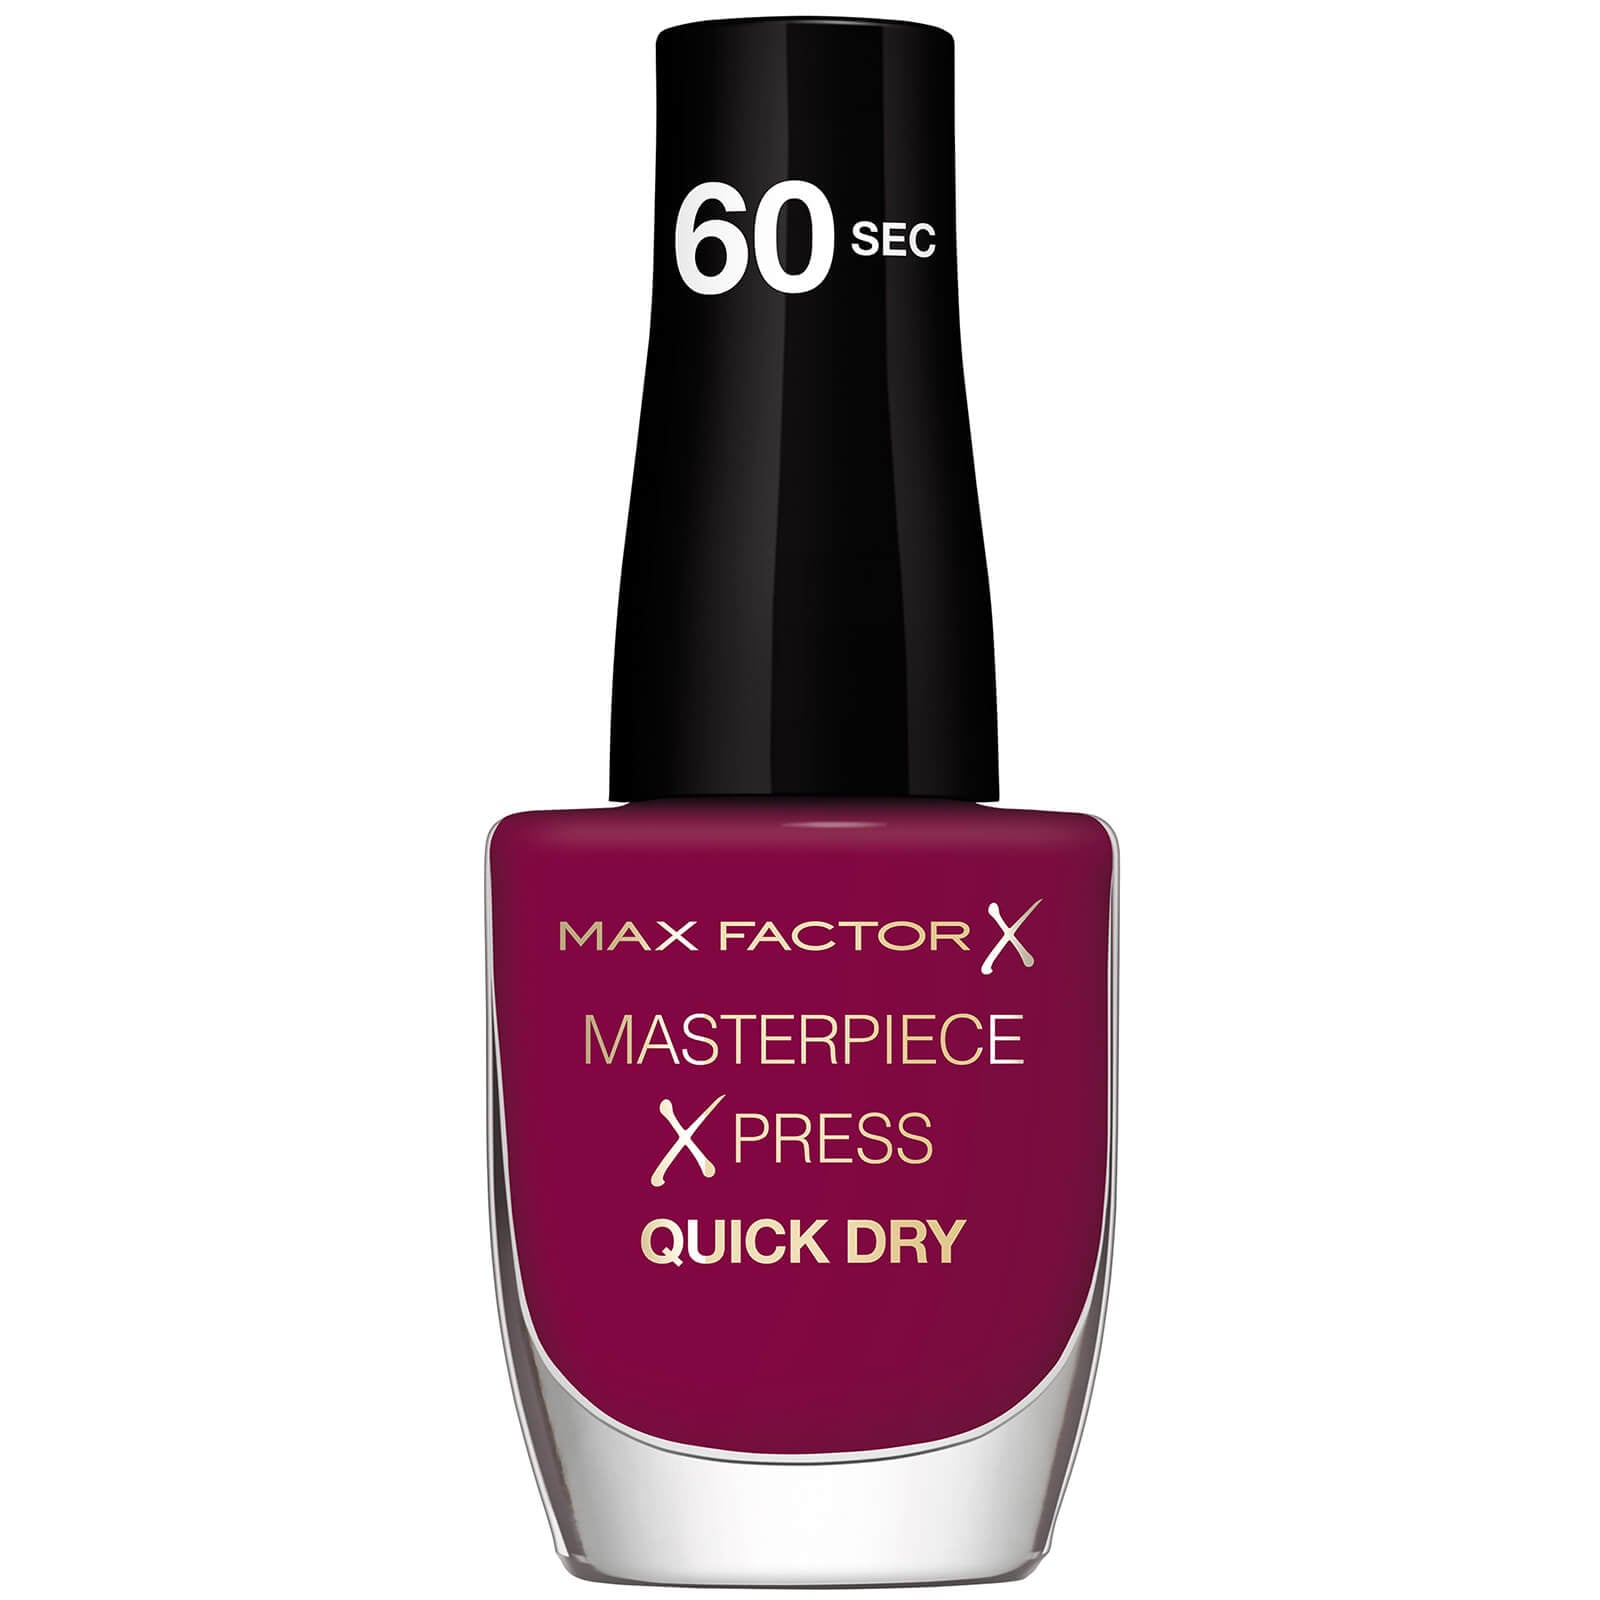 Max Factor Masterpiece Xpress Quick Dry Berry Cute